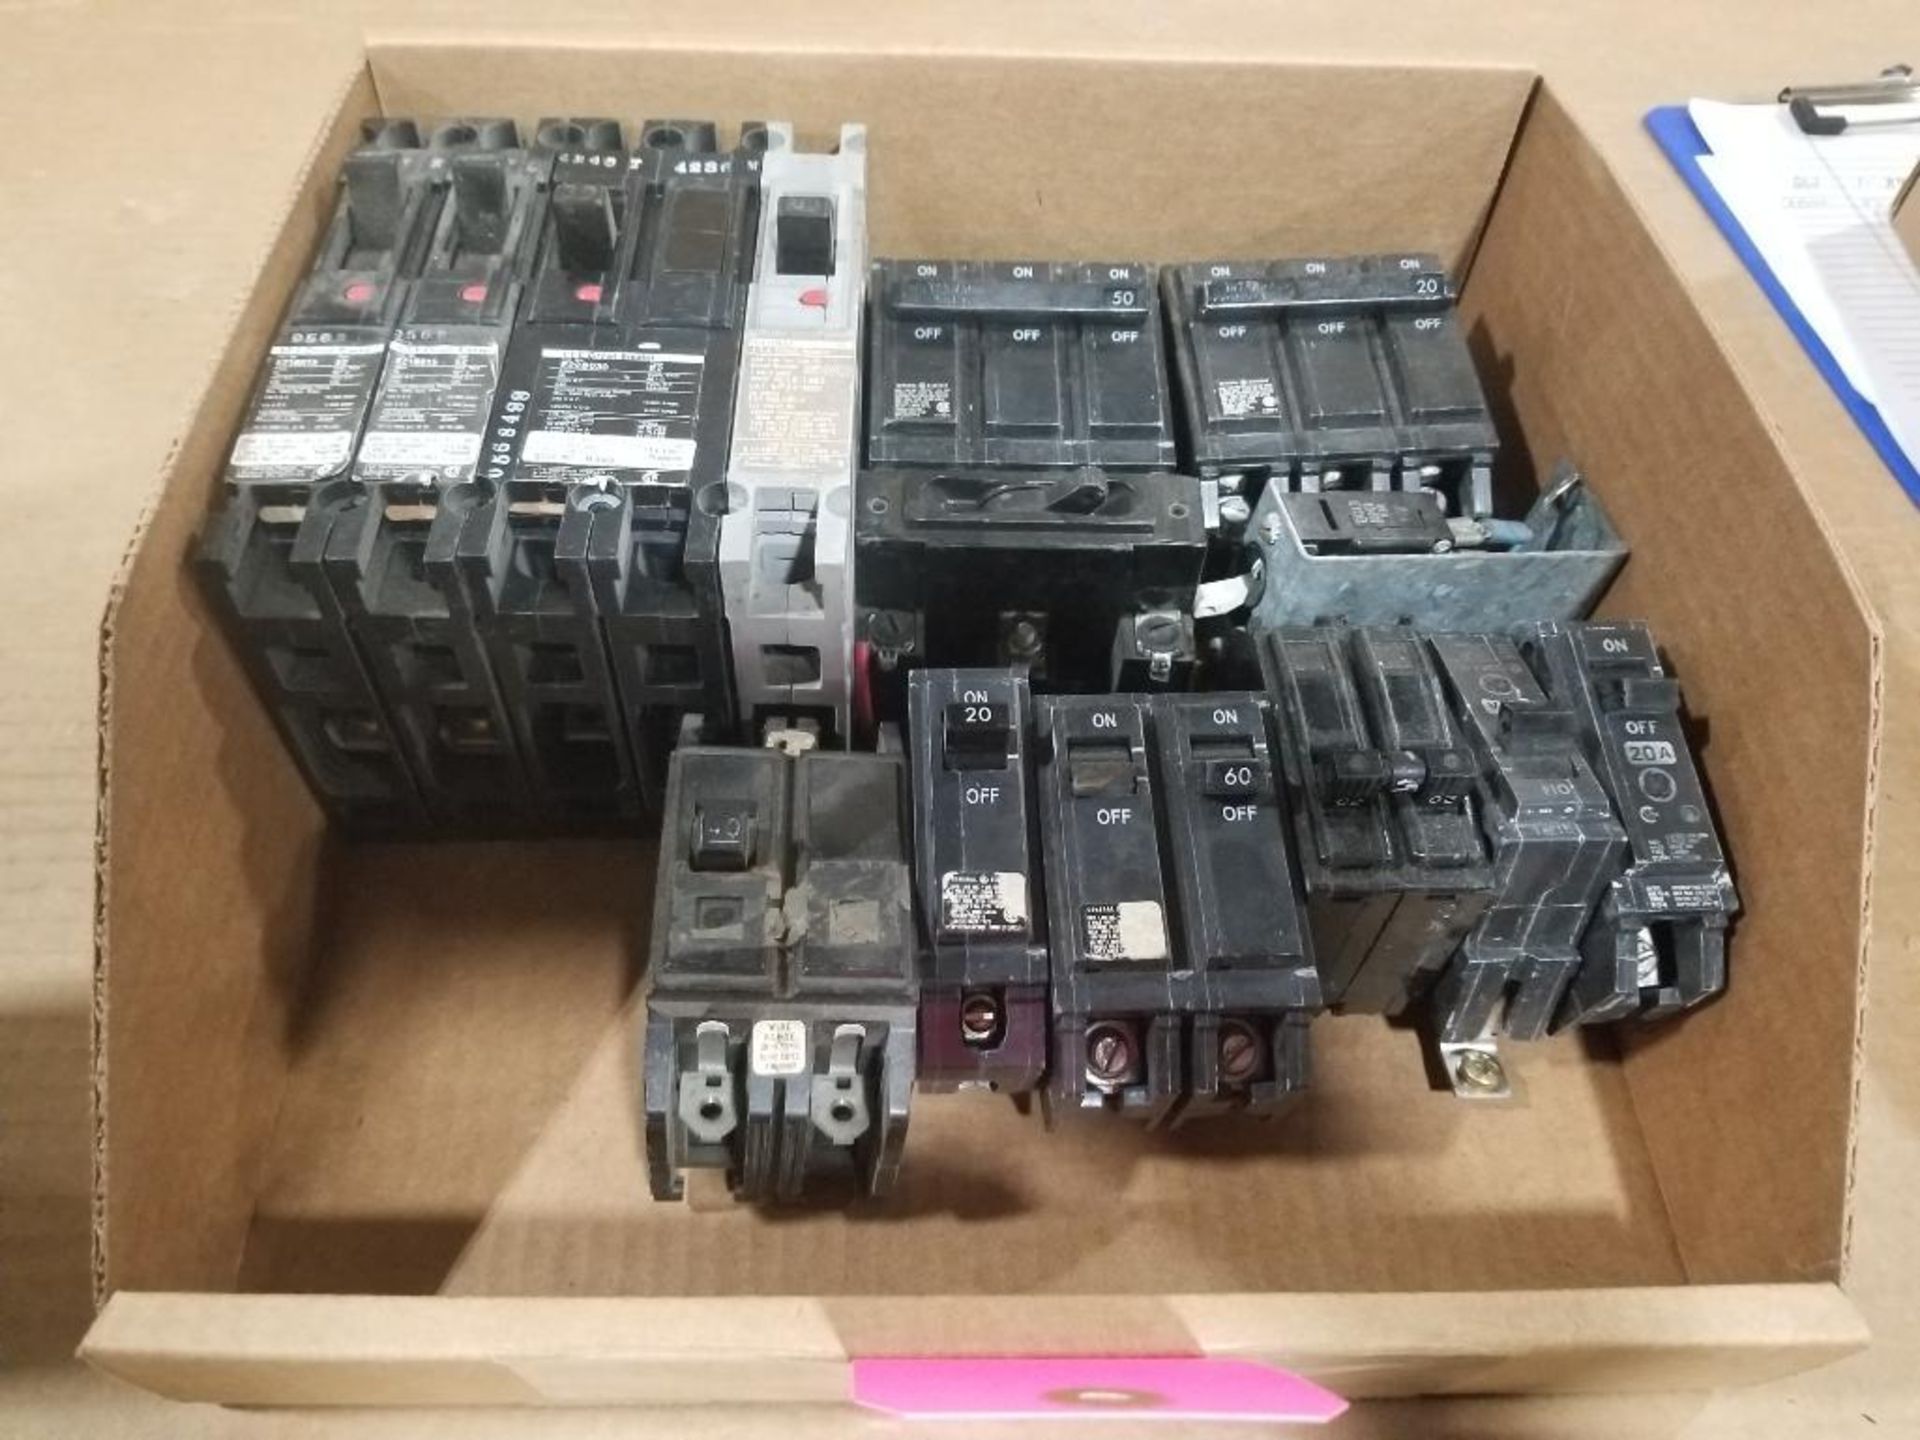 Assorted molded case breakers.